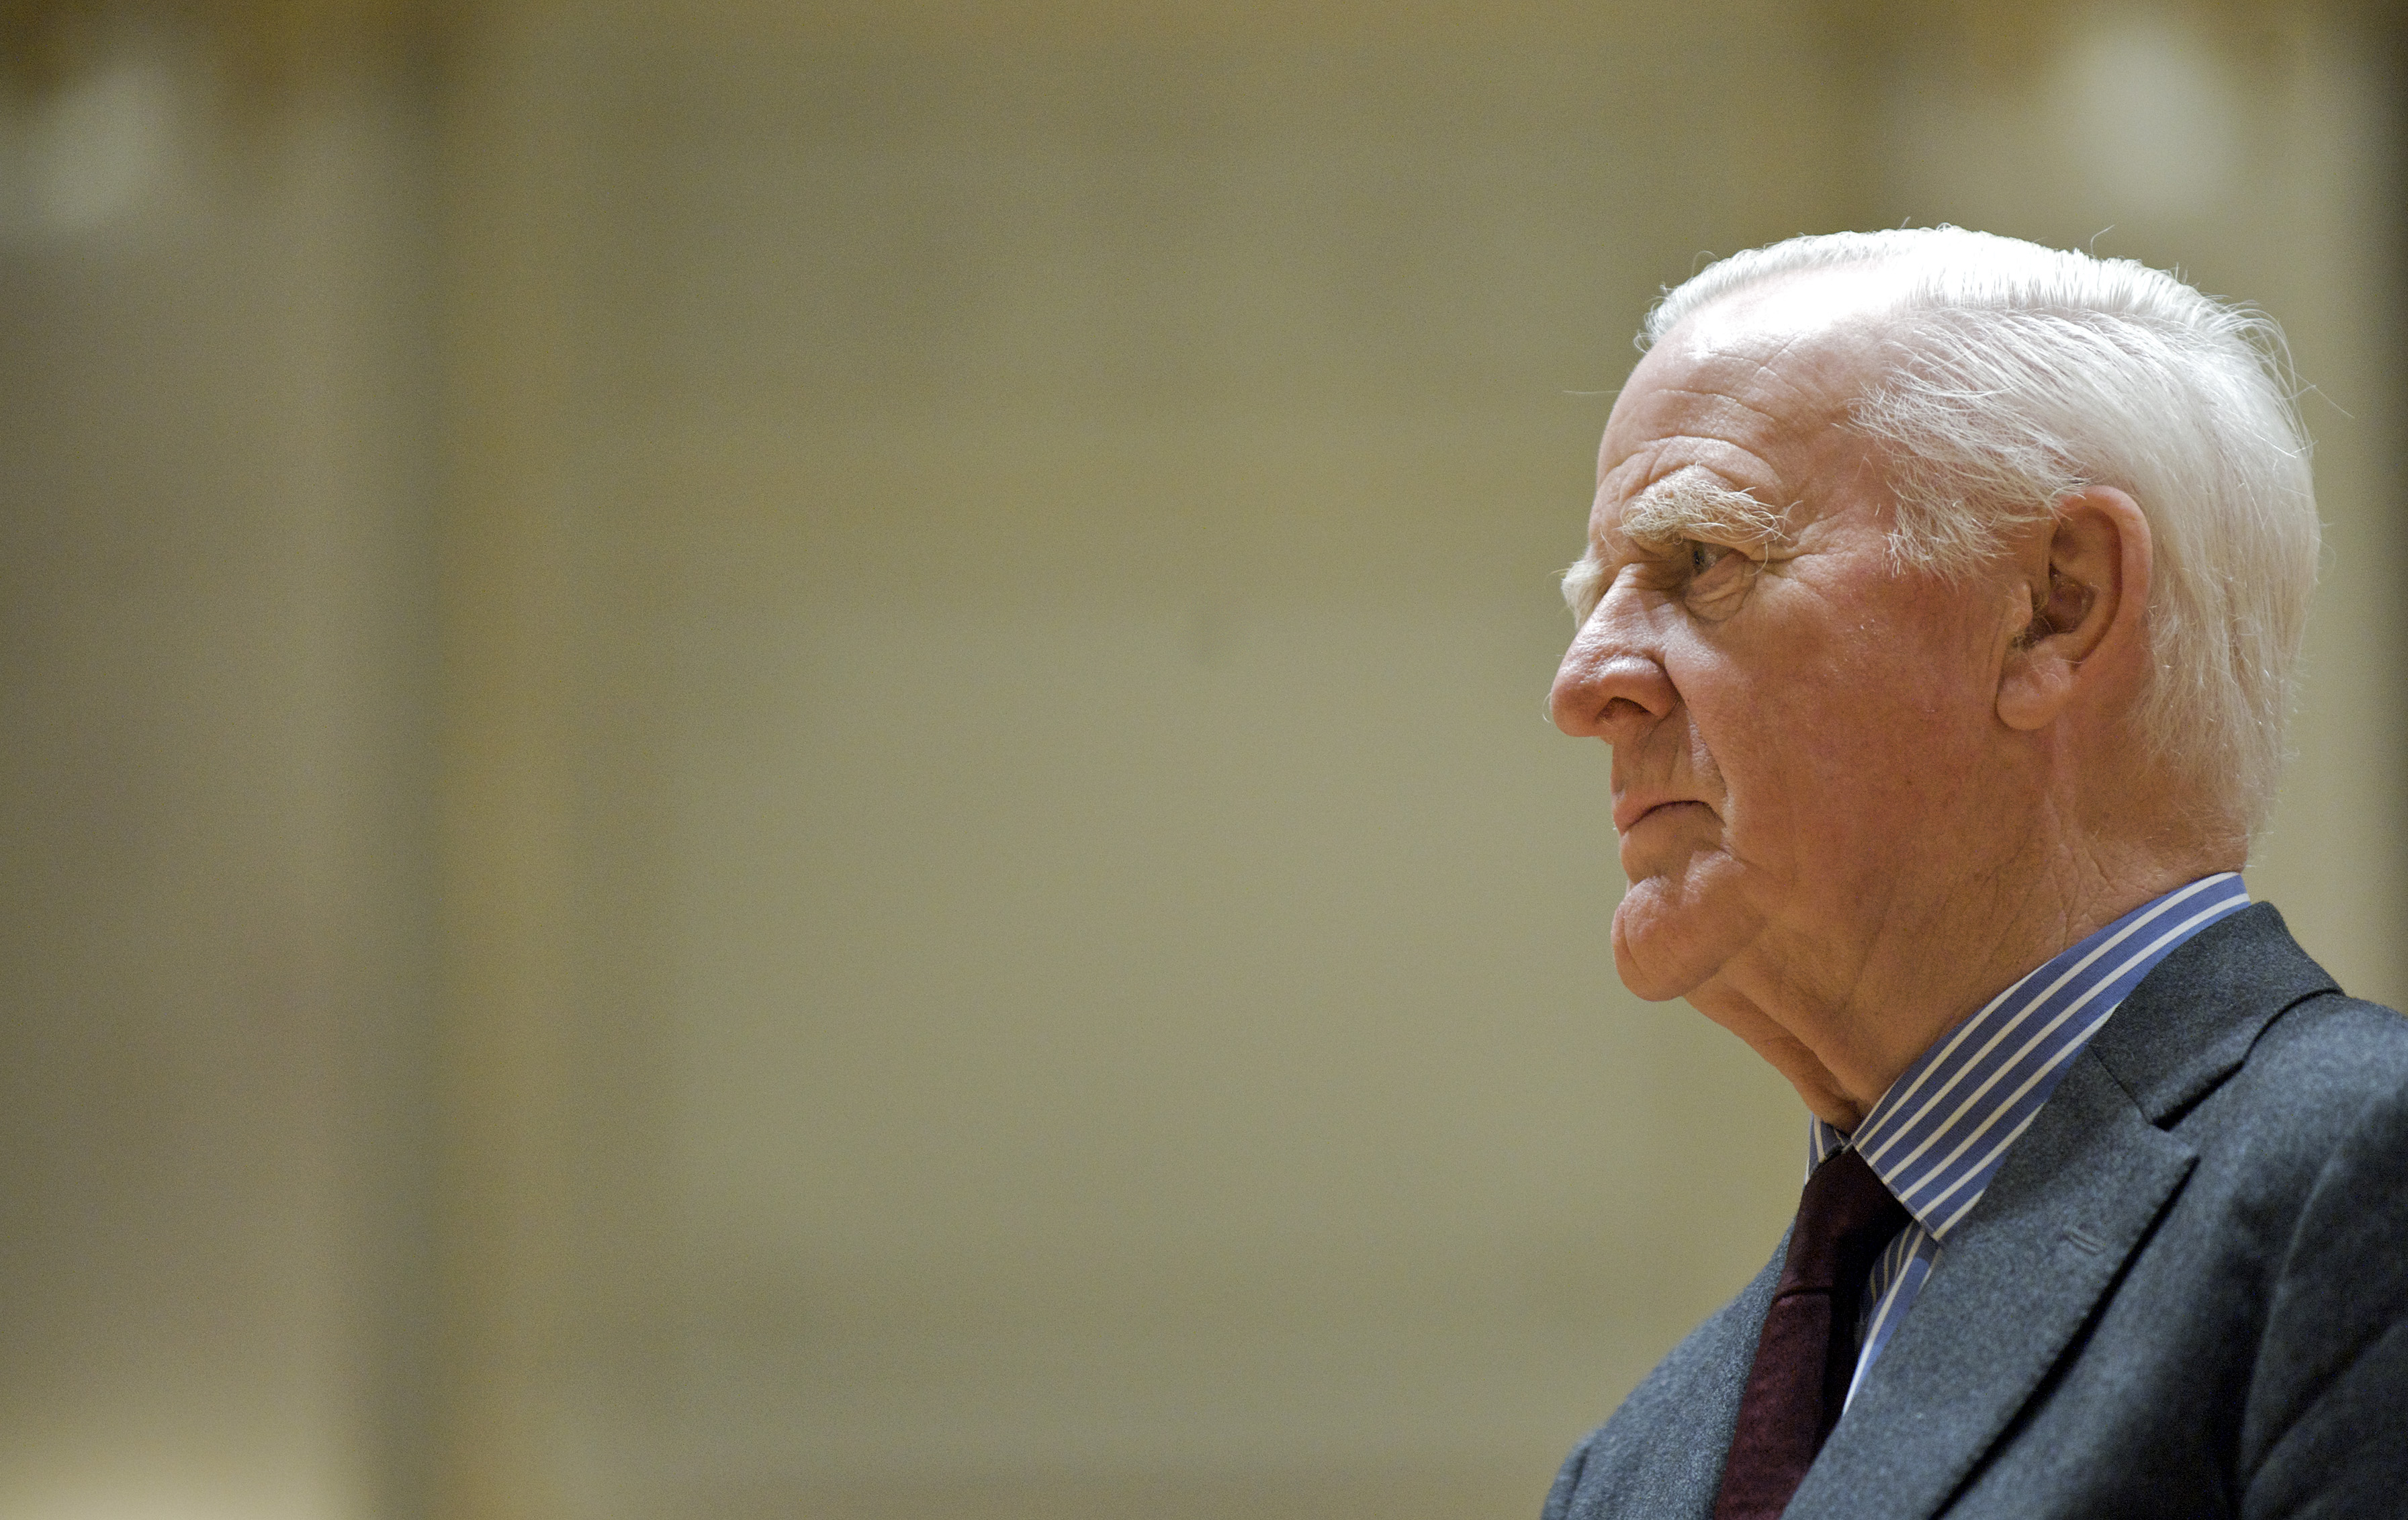 John le Carré receiving his honorary doctorate from the University of Bern in 2009